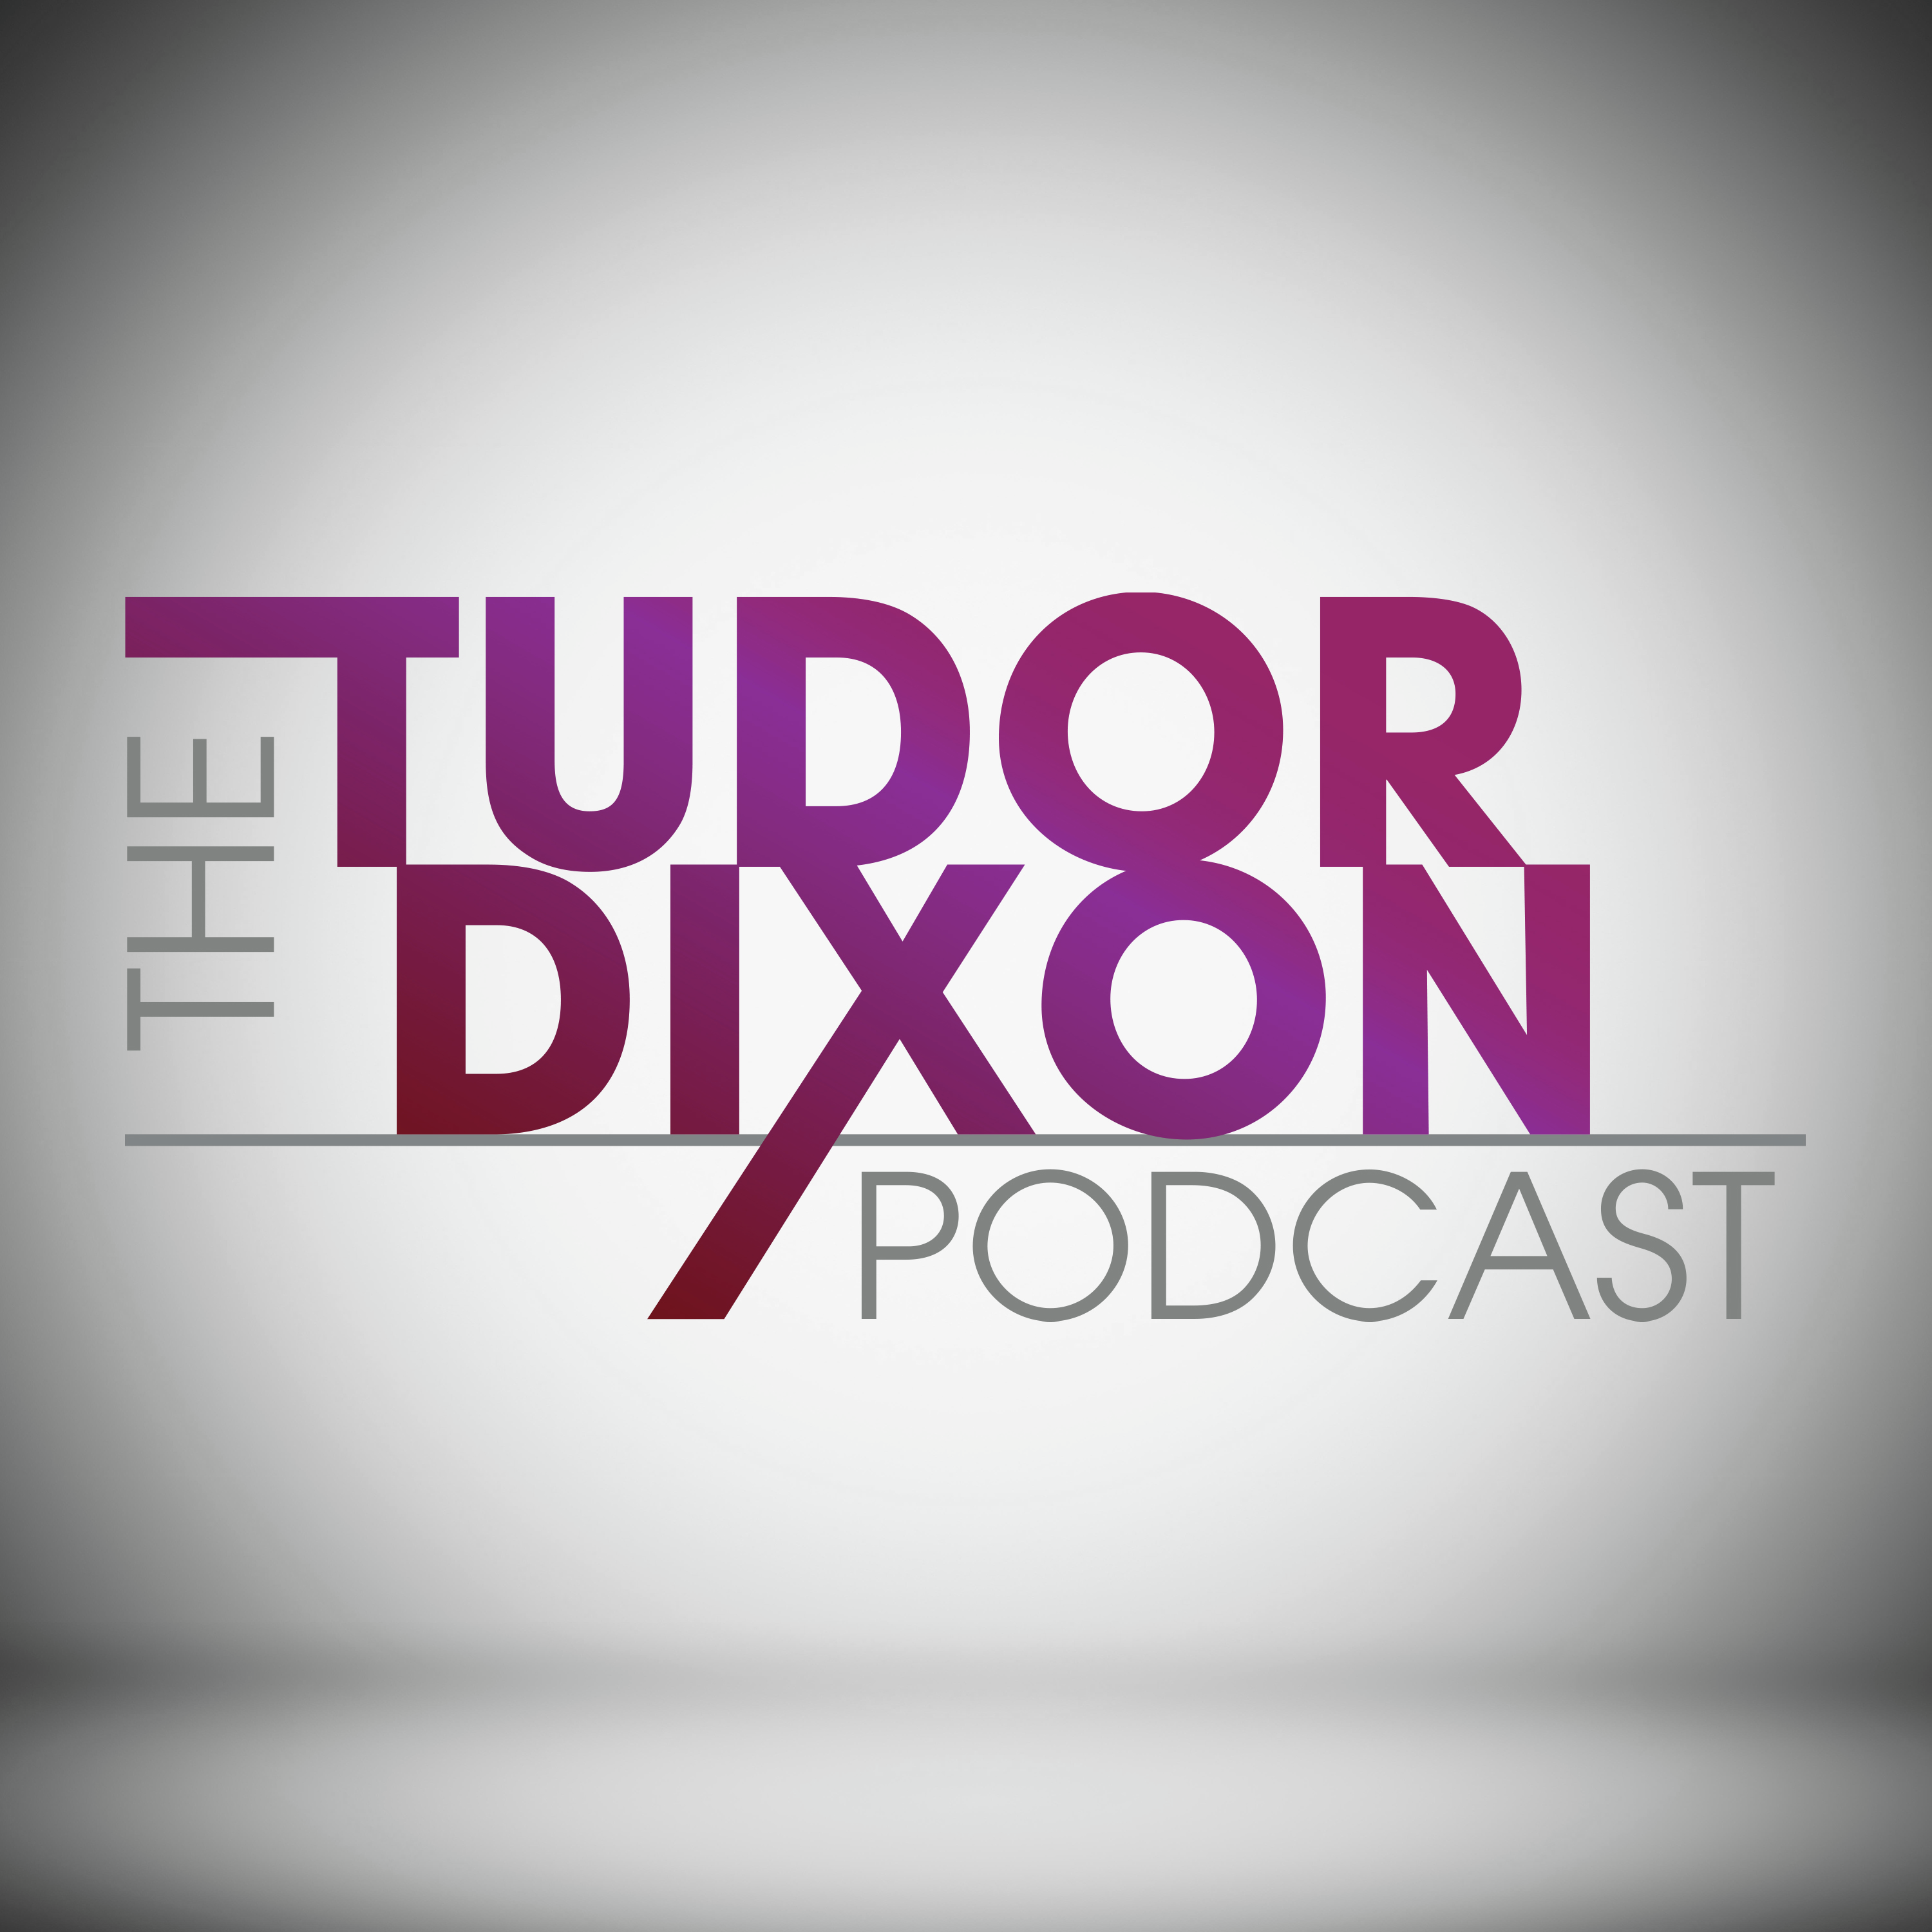 The Tudor Dixon Podcast: The Left's Power-Hungry Tactics and Disregard for the Rule of Law